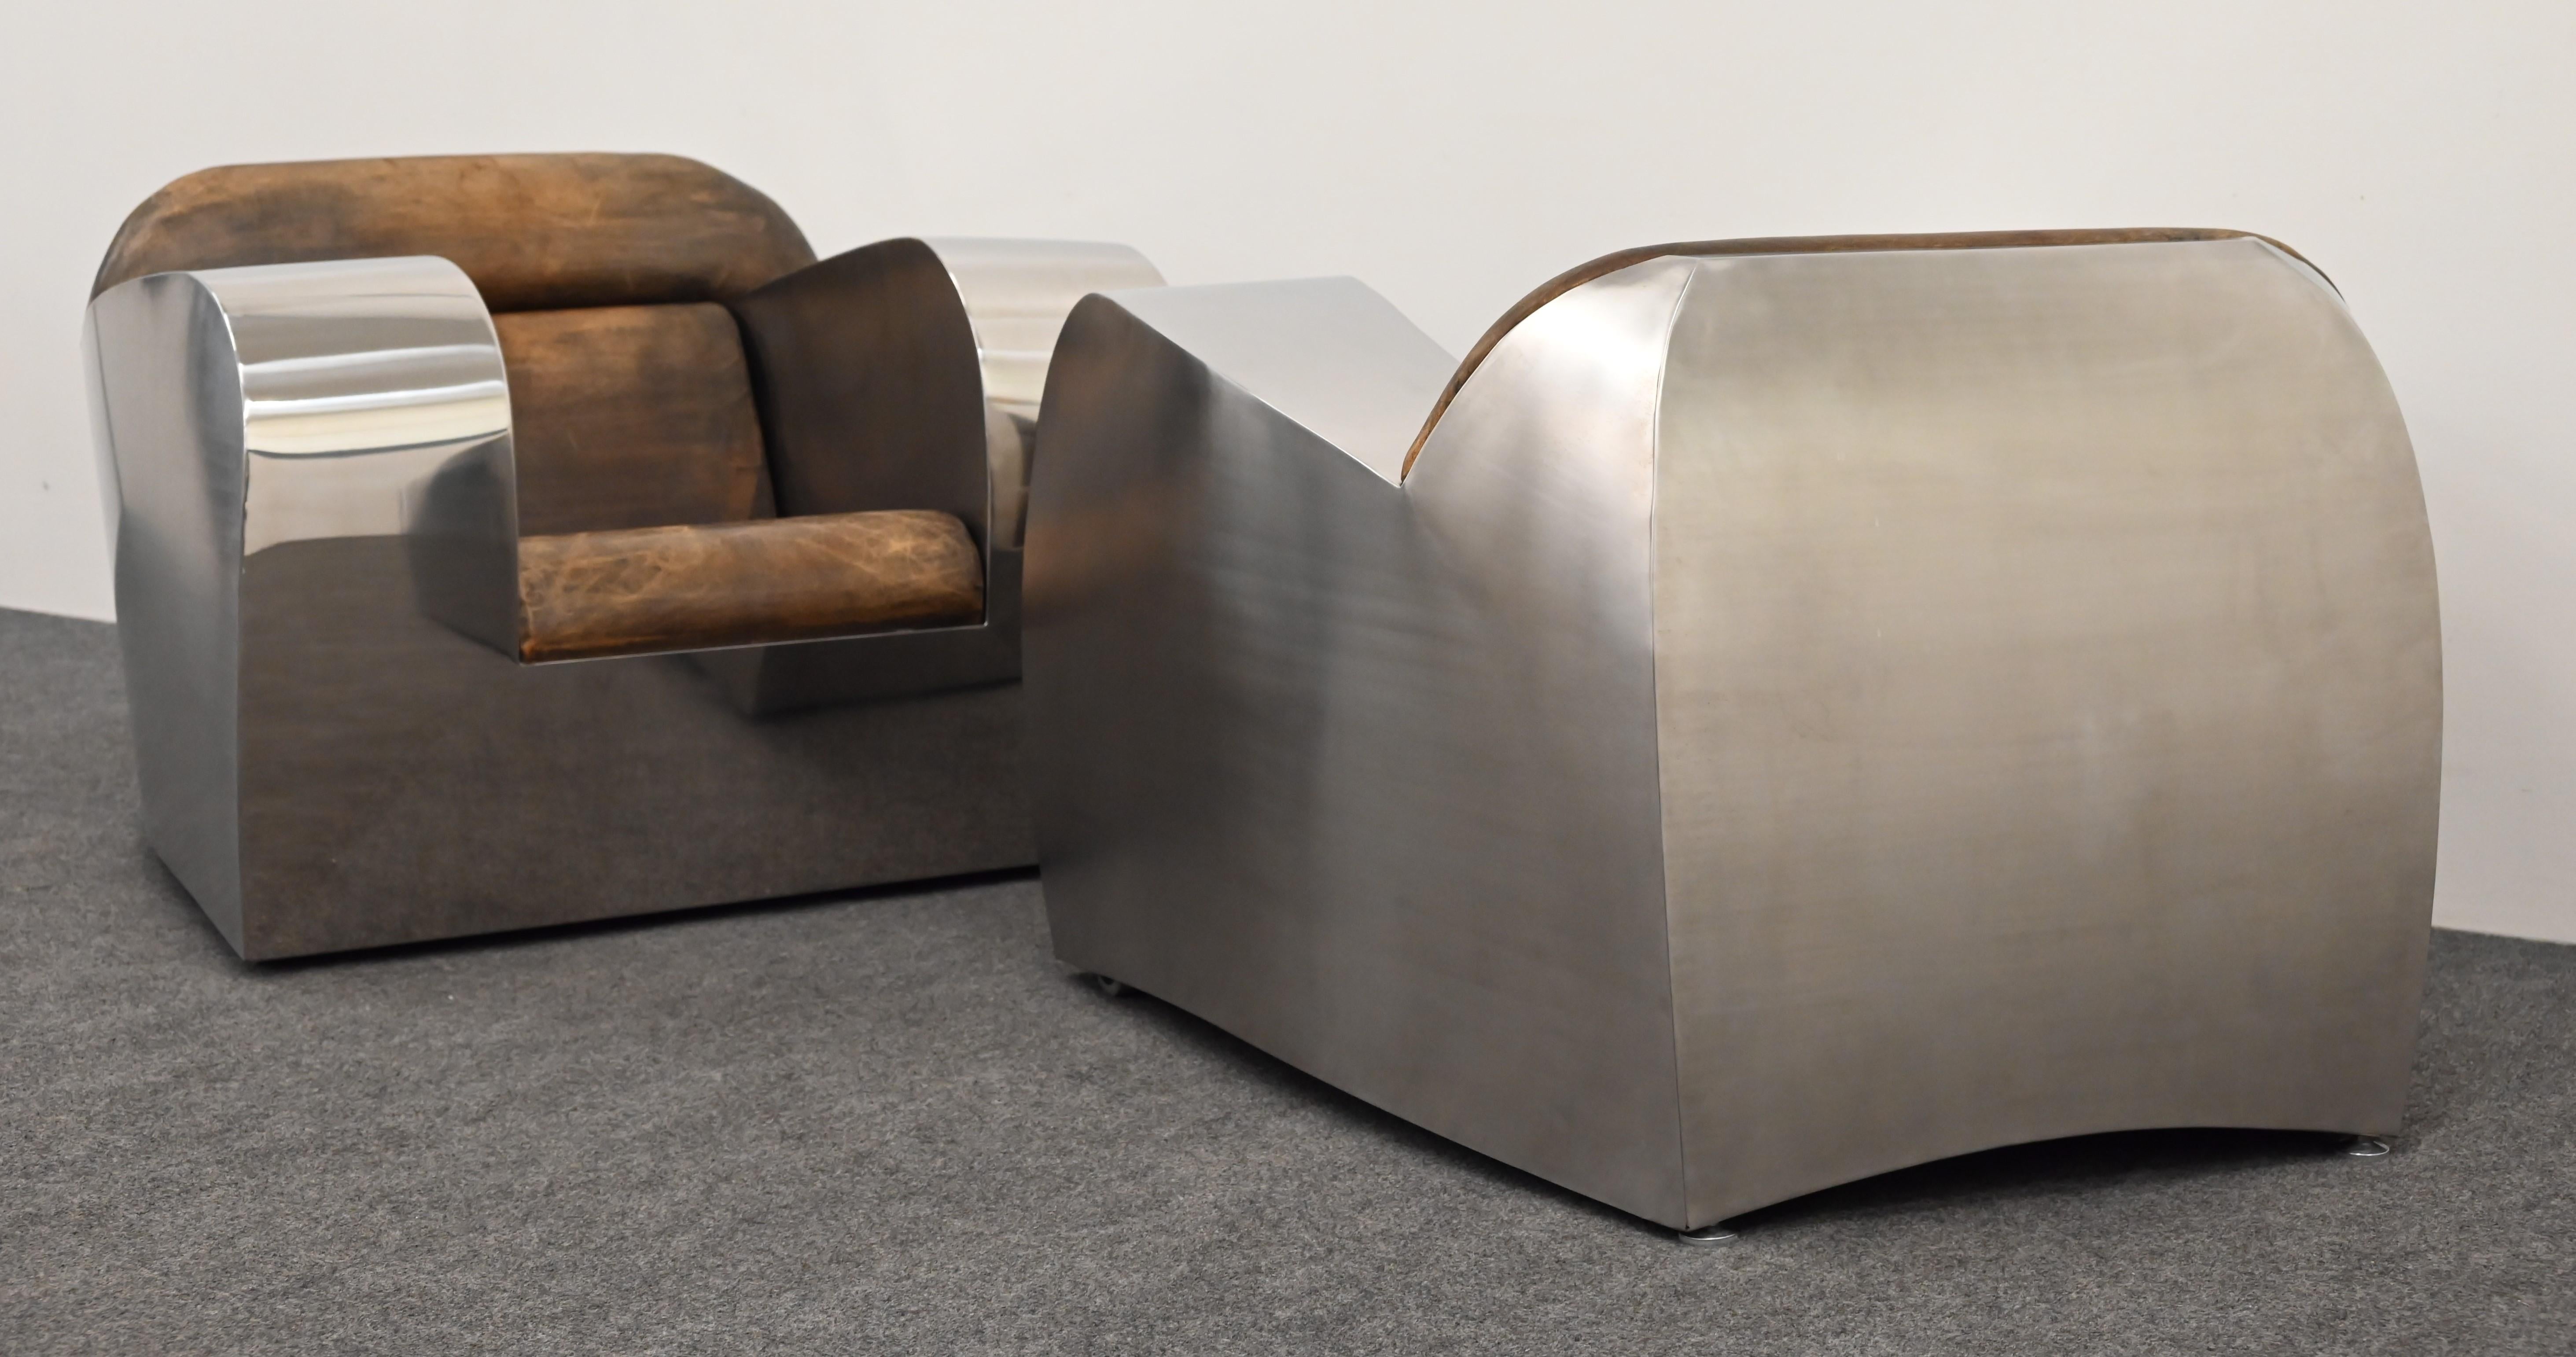 Modern Pair of Stainless Steel Club Chairs by Jonathan Singleton, 20th Century For Sale